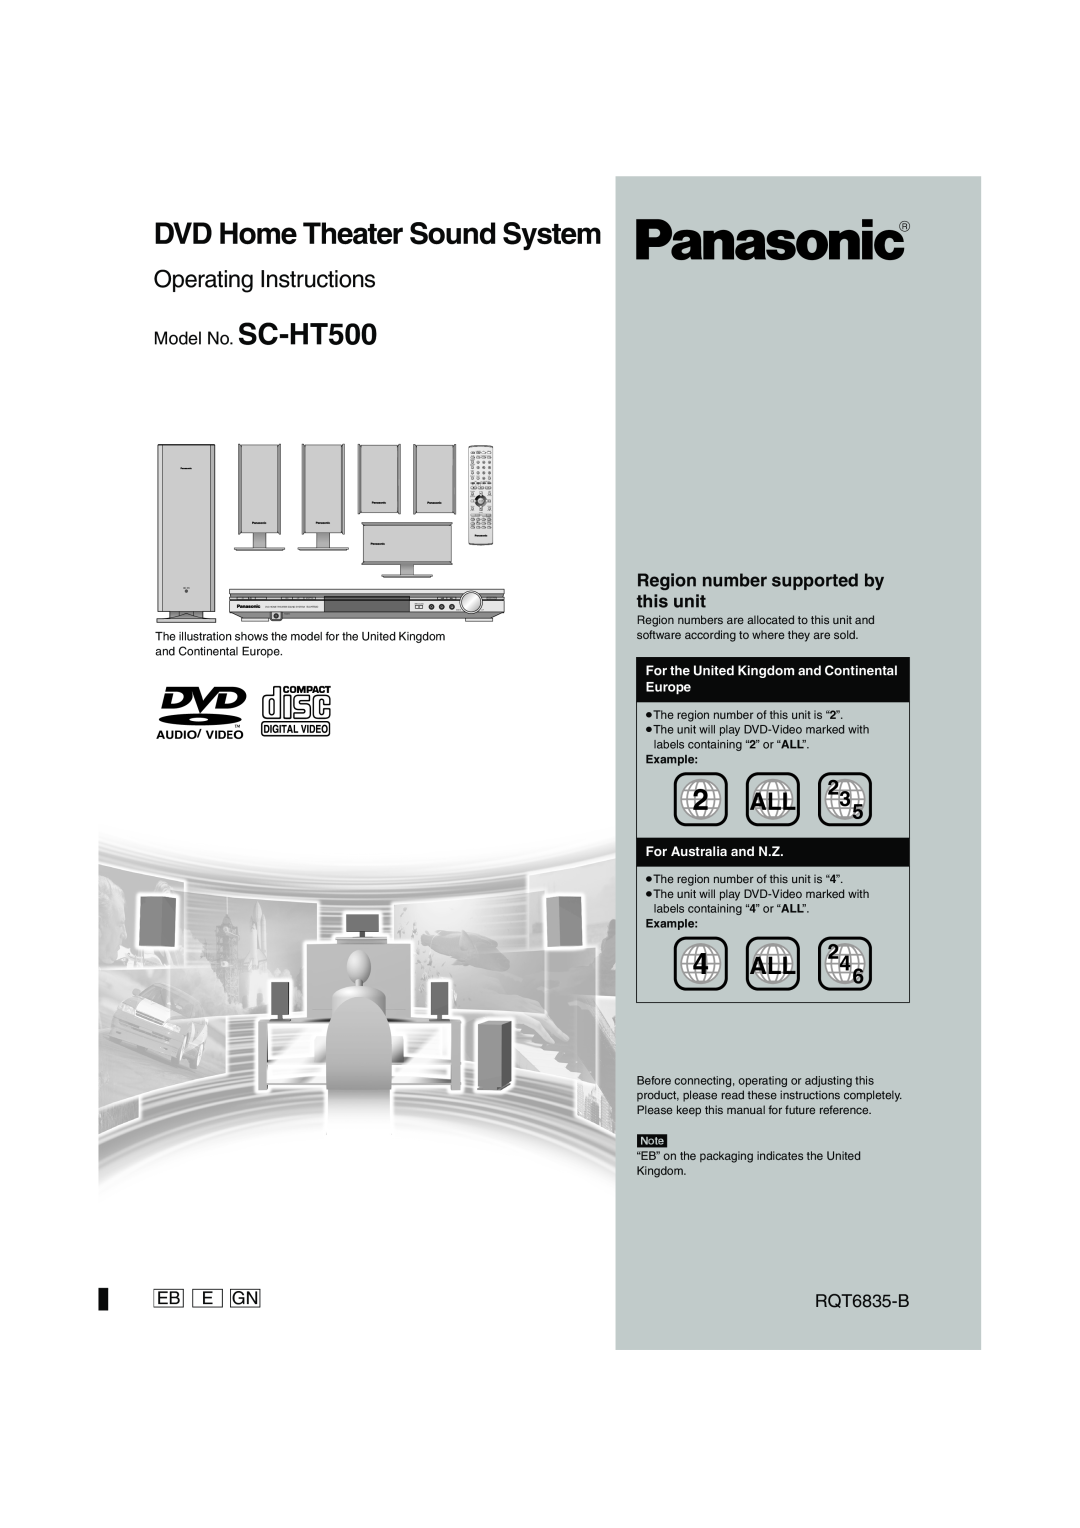 Panasonic operating instructions Model No. SC-HT500, Eb E Gn, Region number supported by this unit, RQT6835-B, 2ALL 